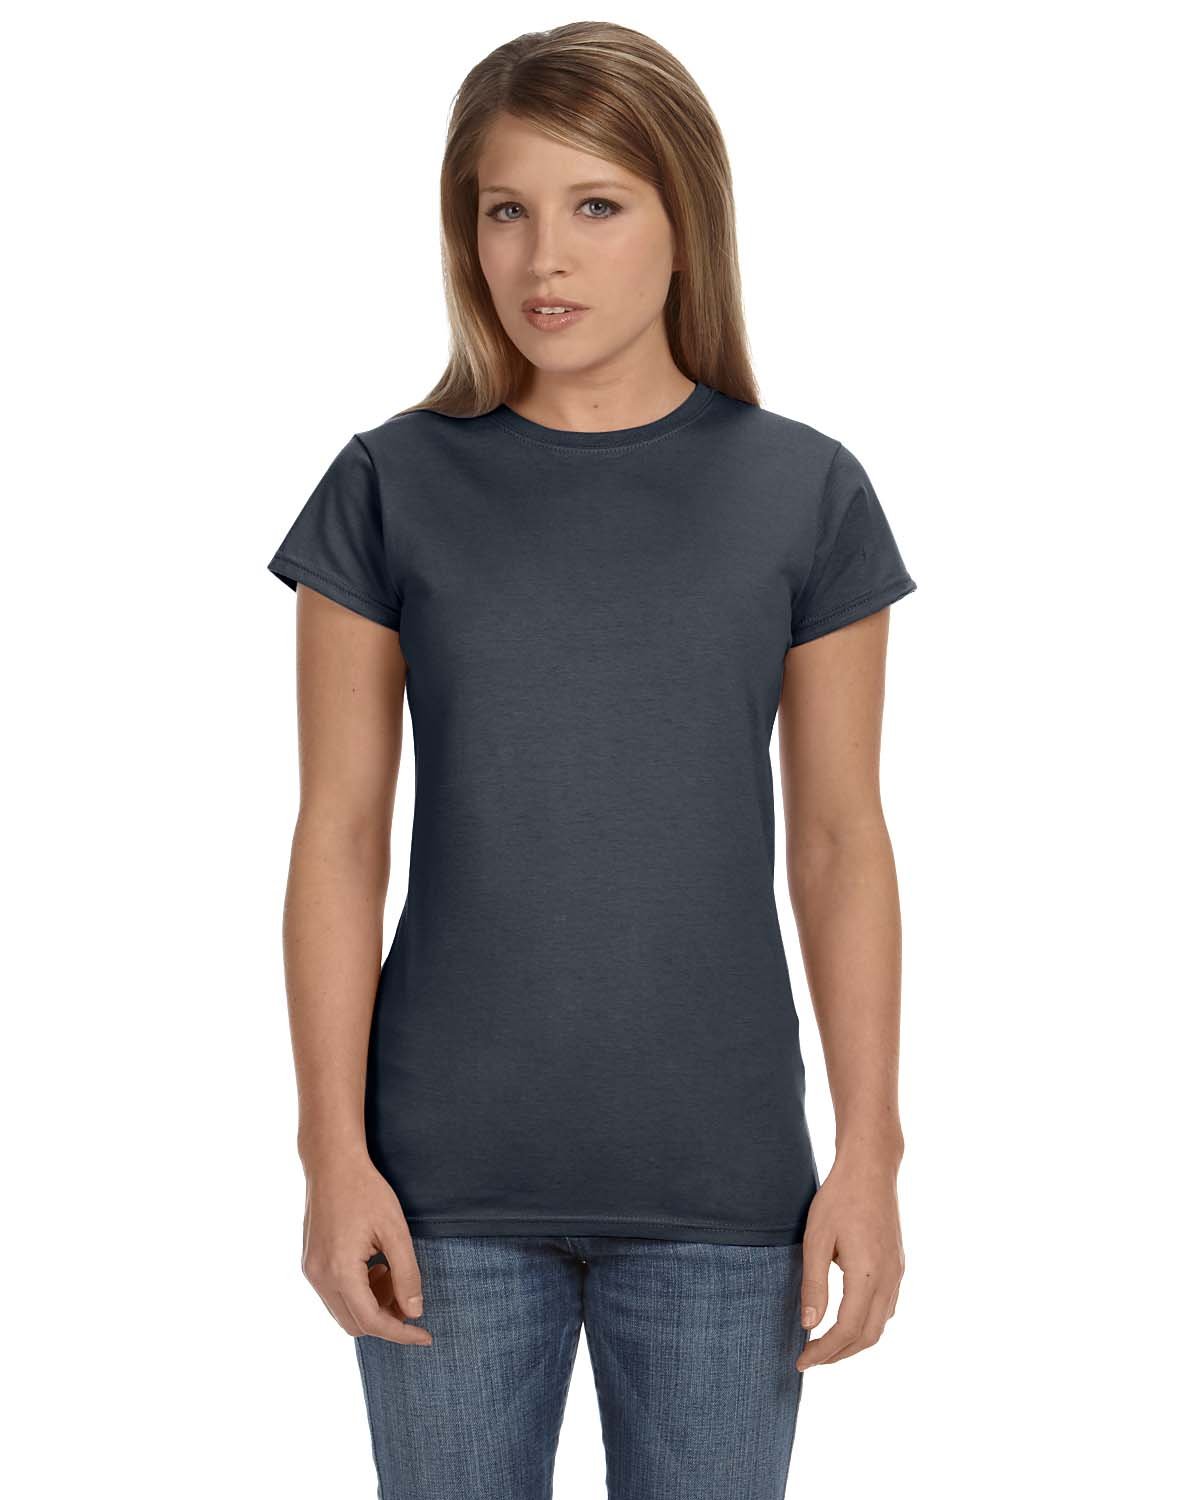 Gildan Ladies' Softstyle® Fitted T-Shirt CHARCOAL 